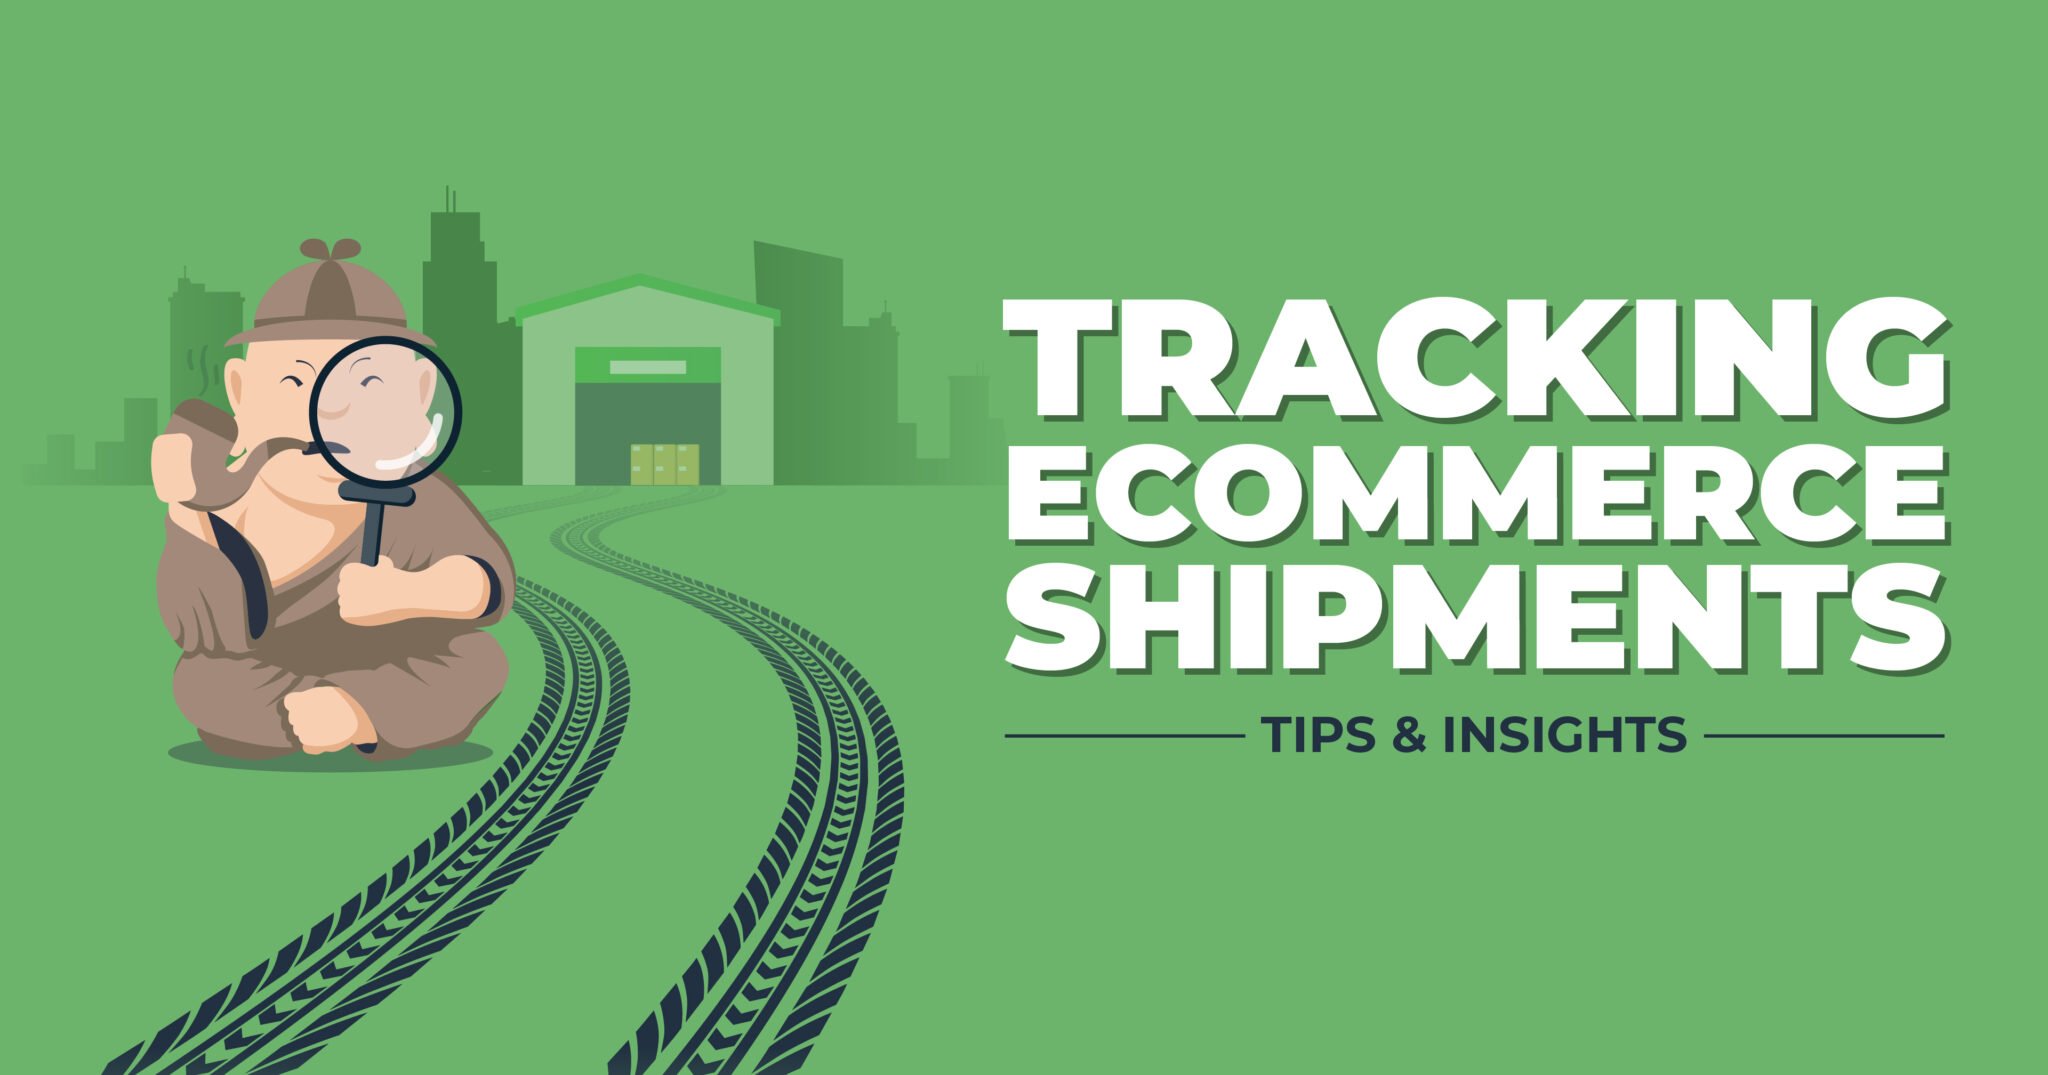 Tracking Ecommerce Shipments: Tips & Insights